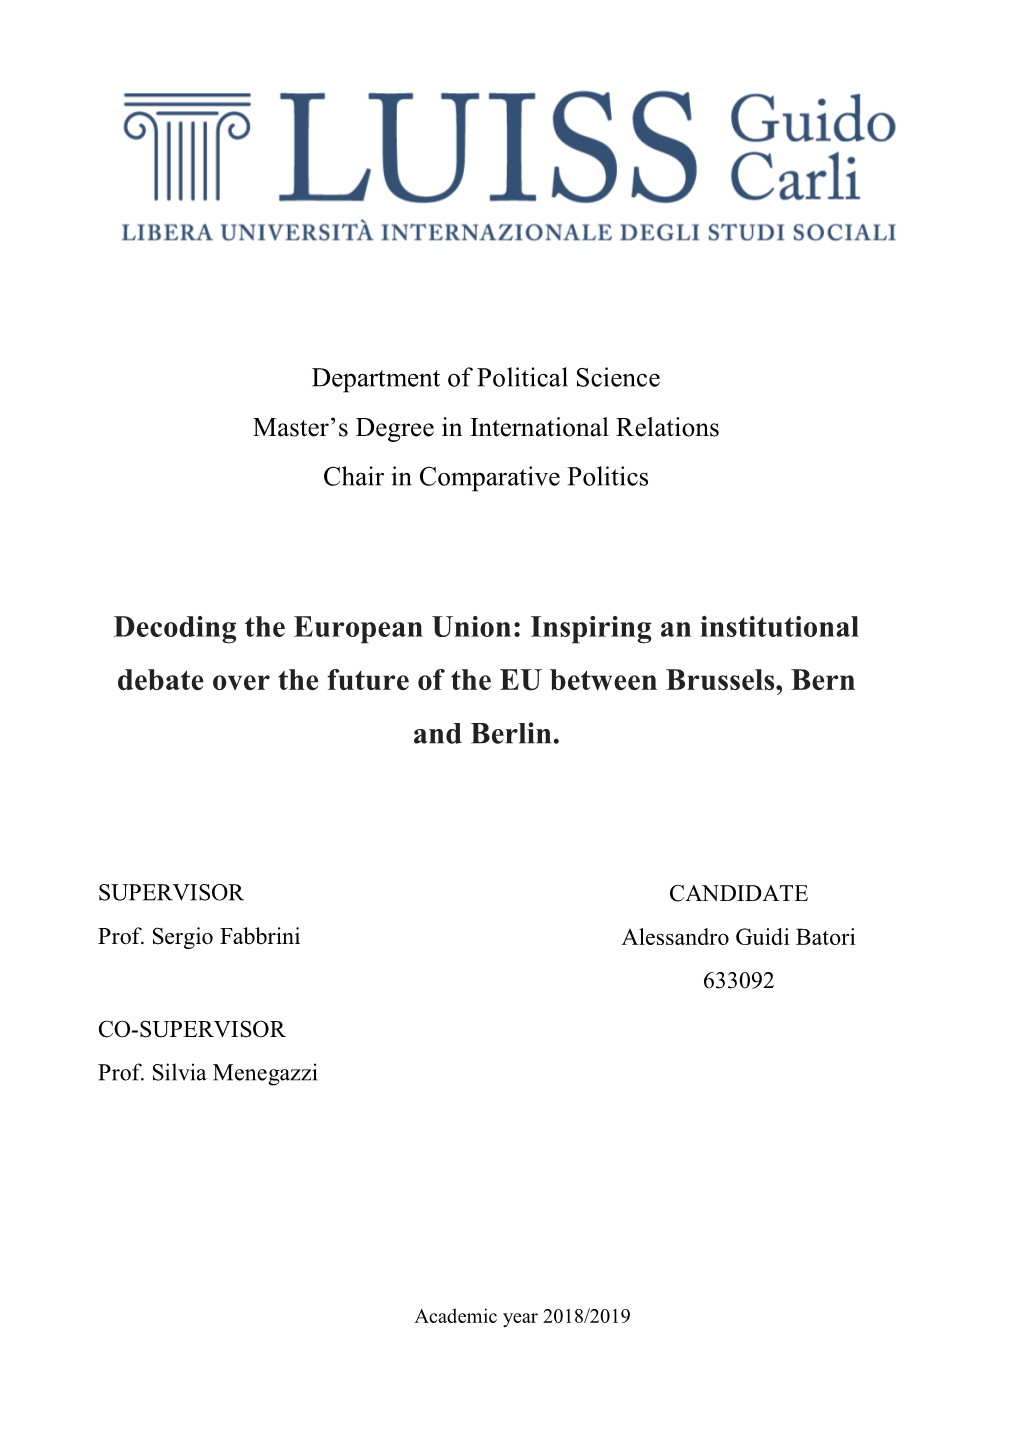 Decoding the European Union: Inspiring an Institutional Debate Over the Future of the EU Between Brussels, Bern and Berlin